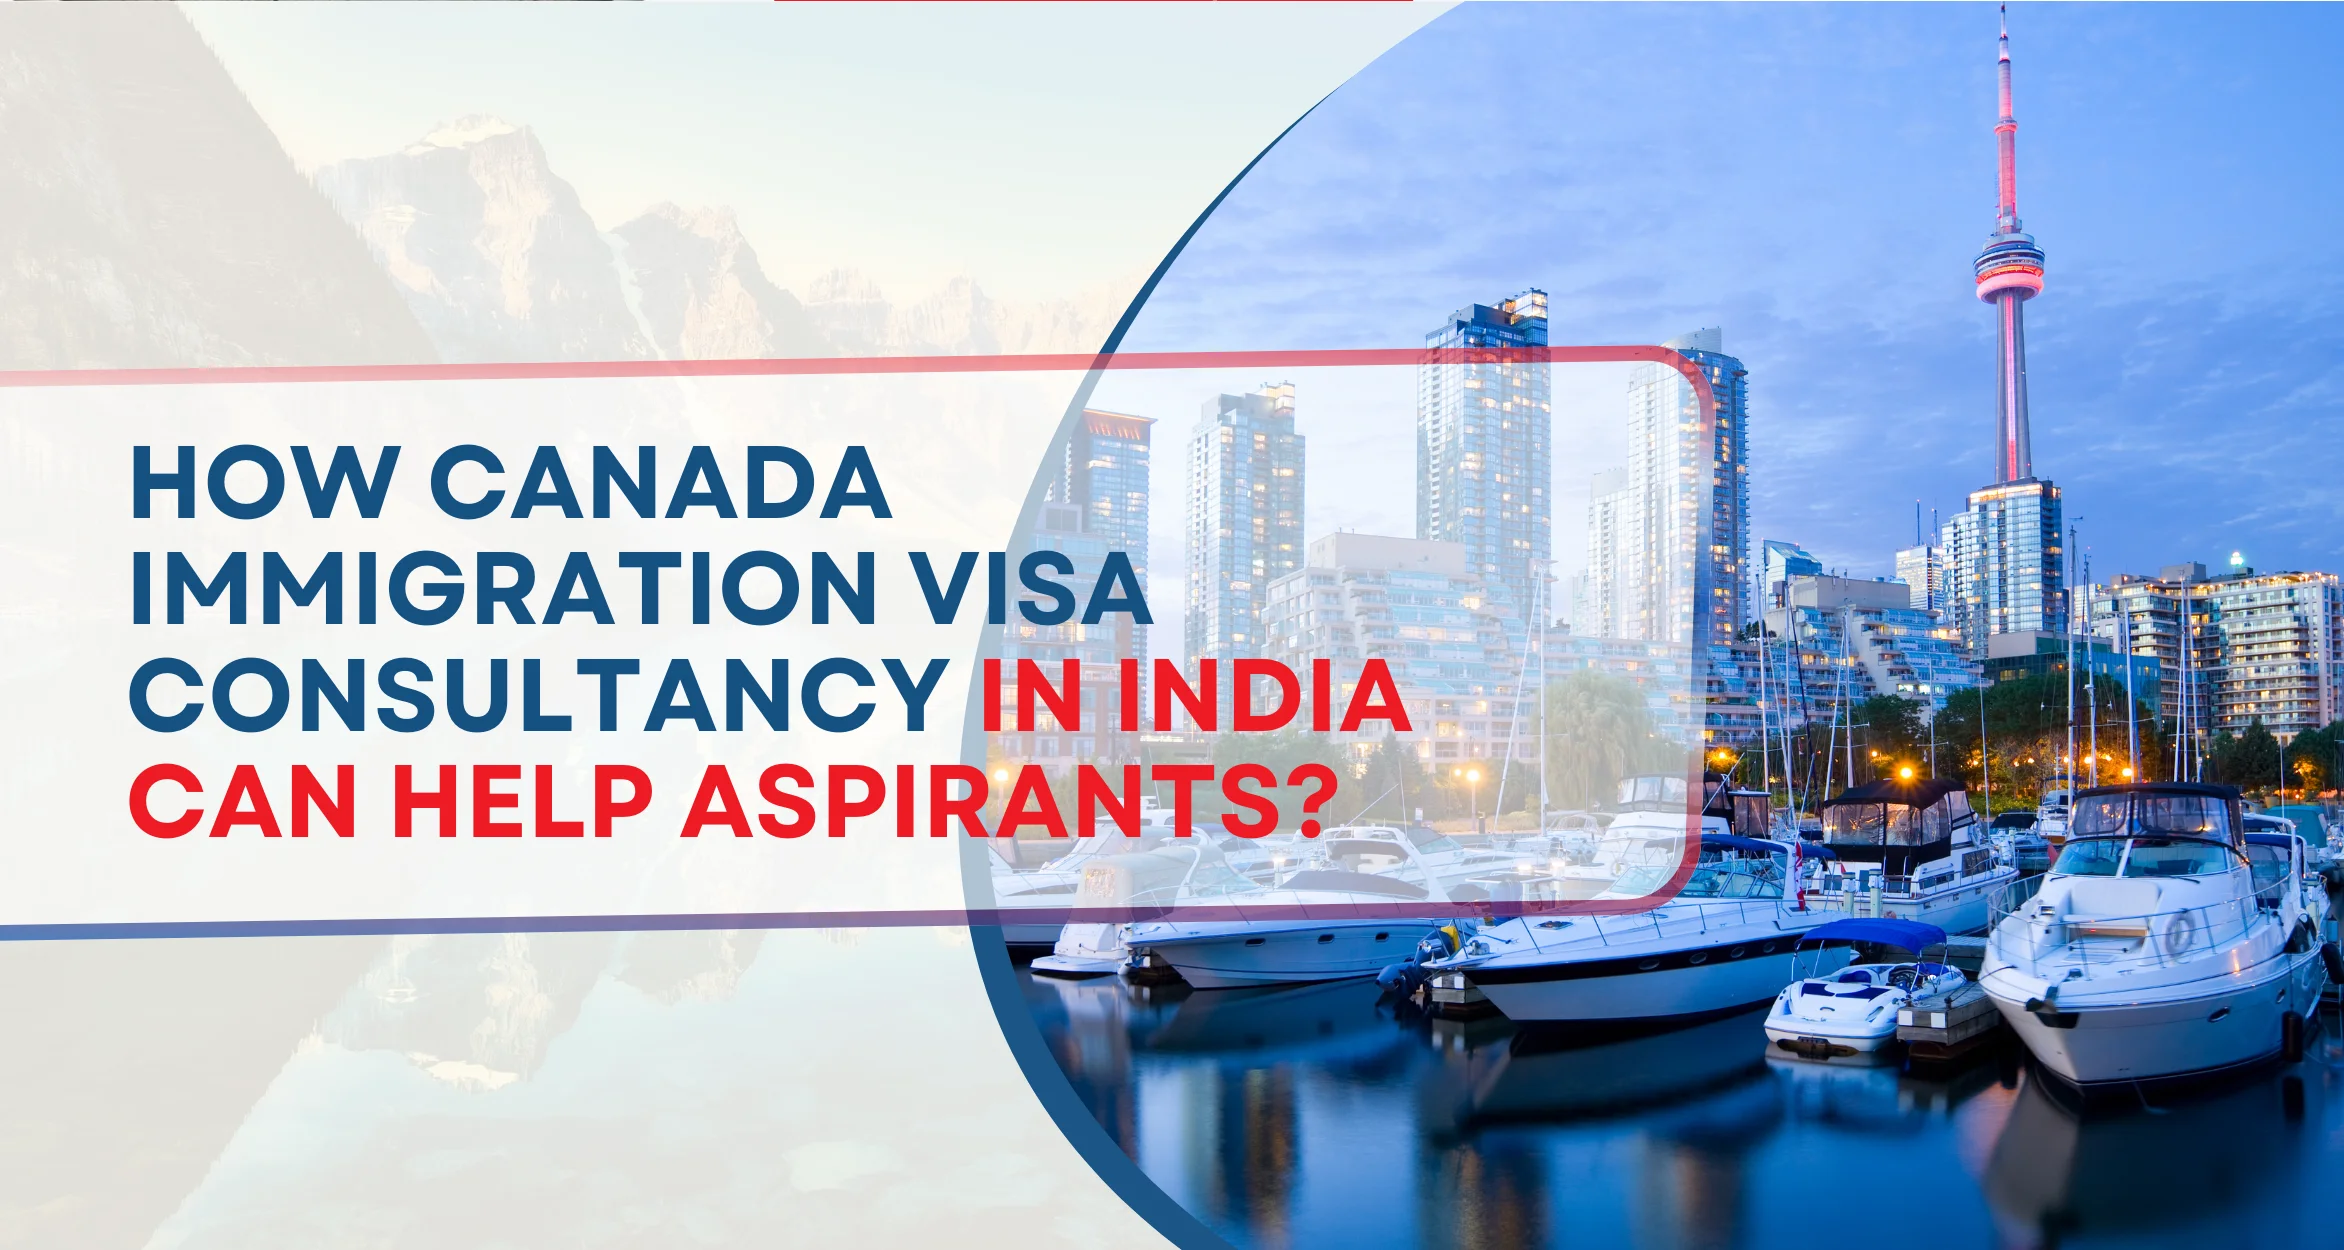 How Canada Immigration Visa consultancy in India can help aspirants?